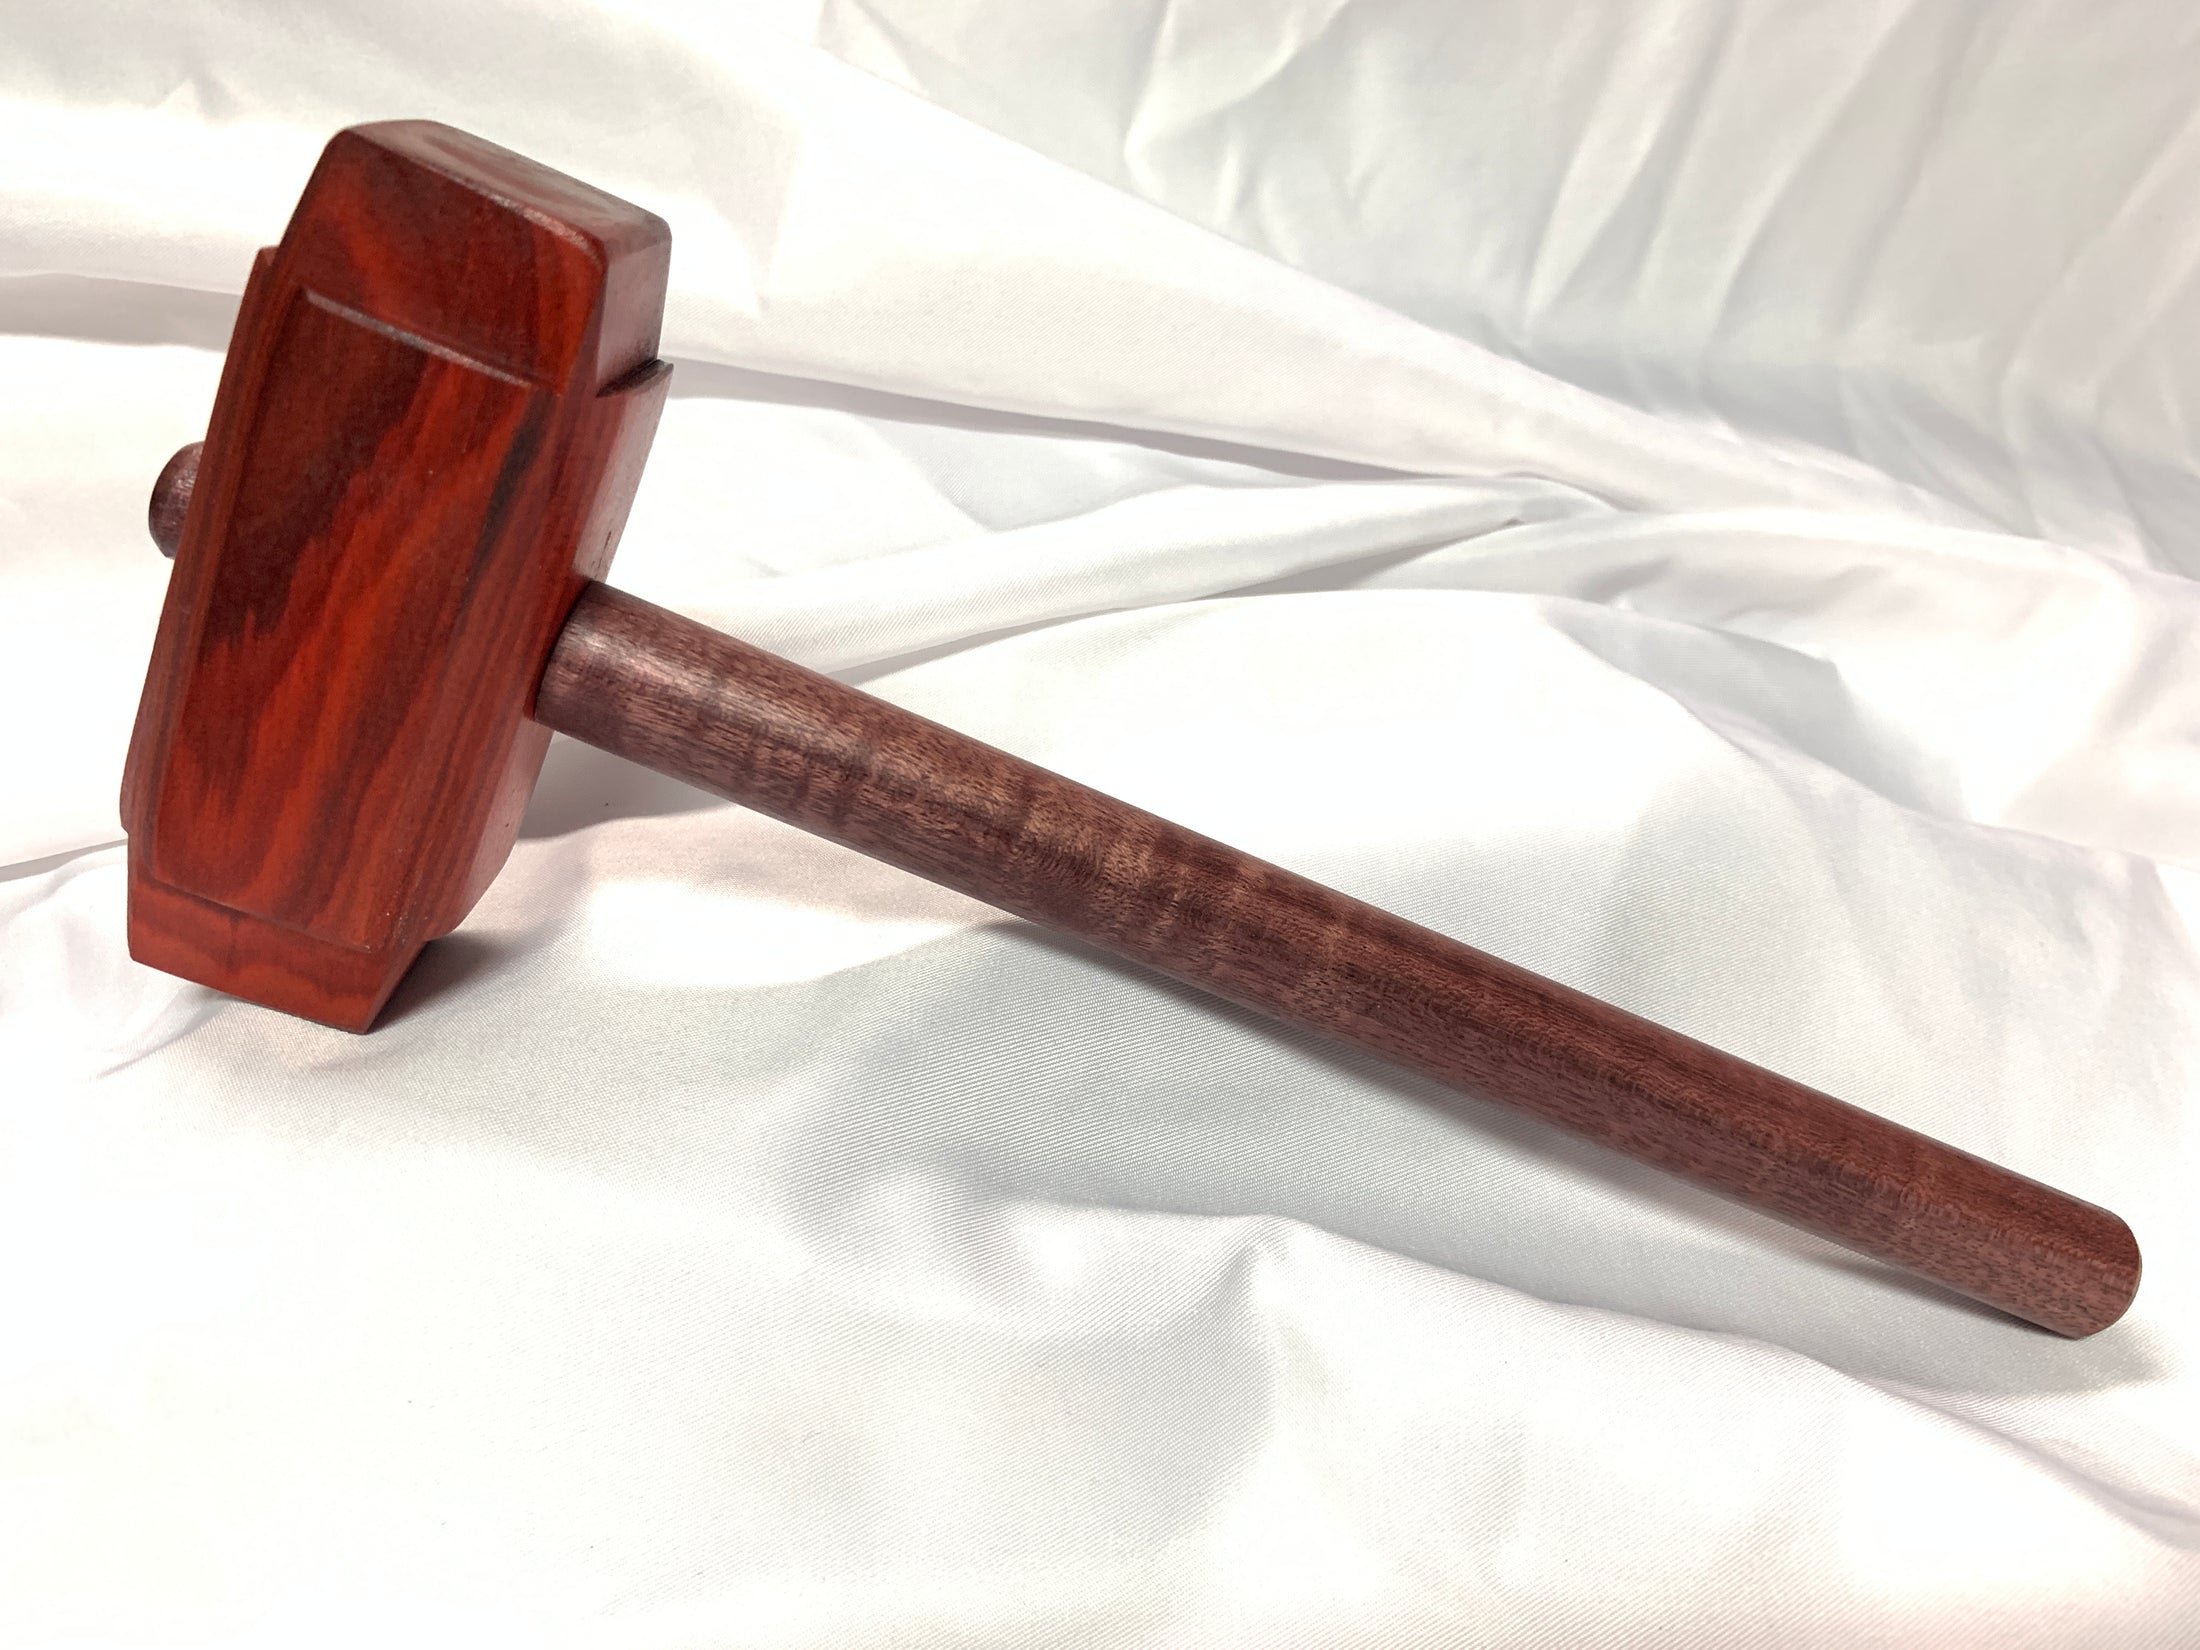 Thors Hammer Woodworking Mallet Redheart Head with Purpleheart Handle Kings Fine Woodworking